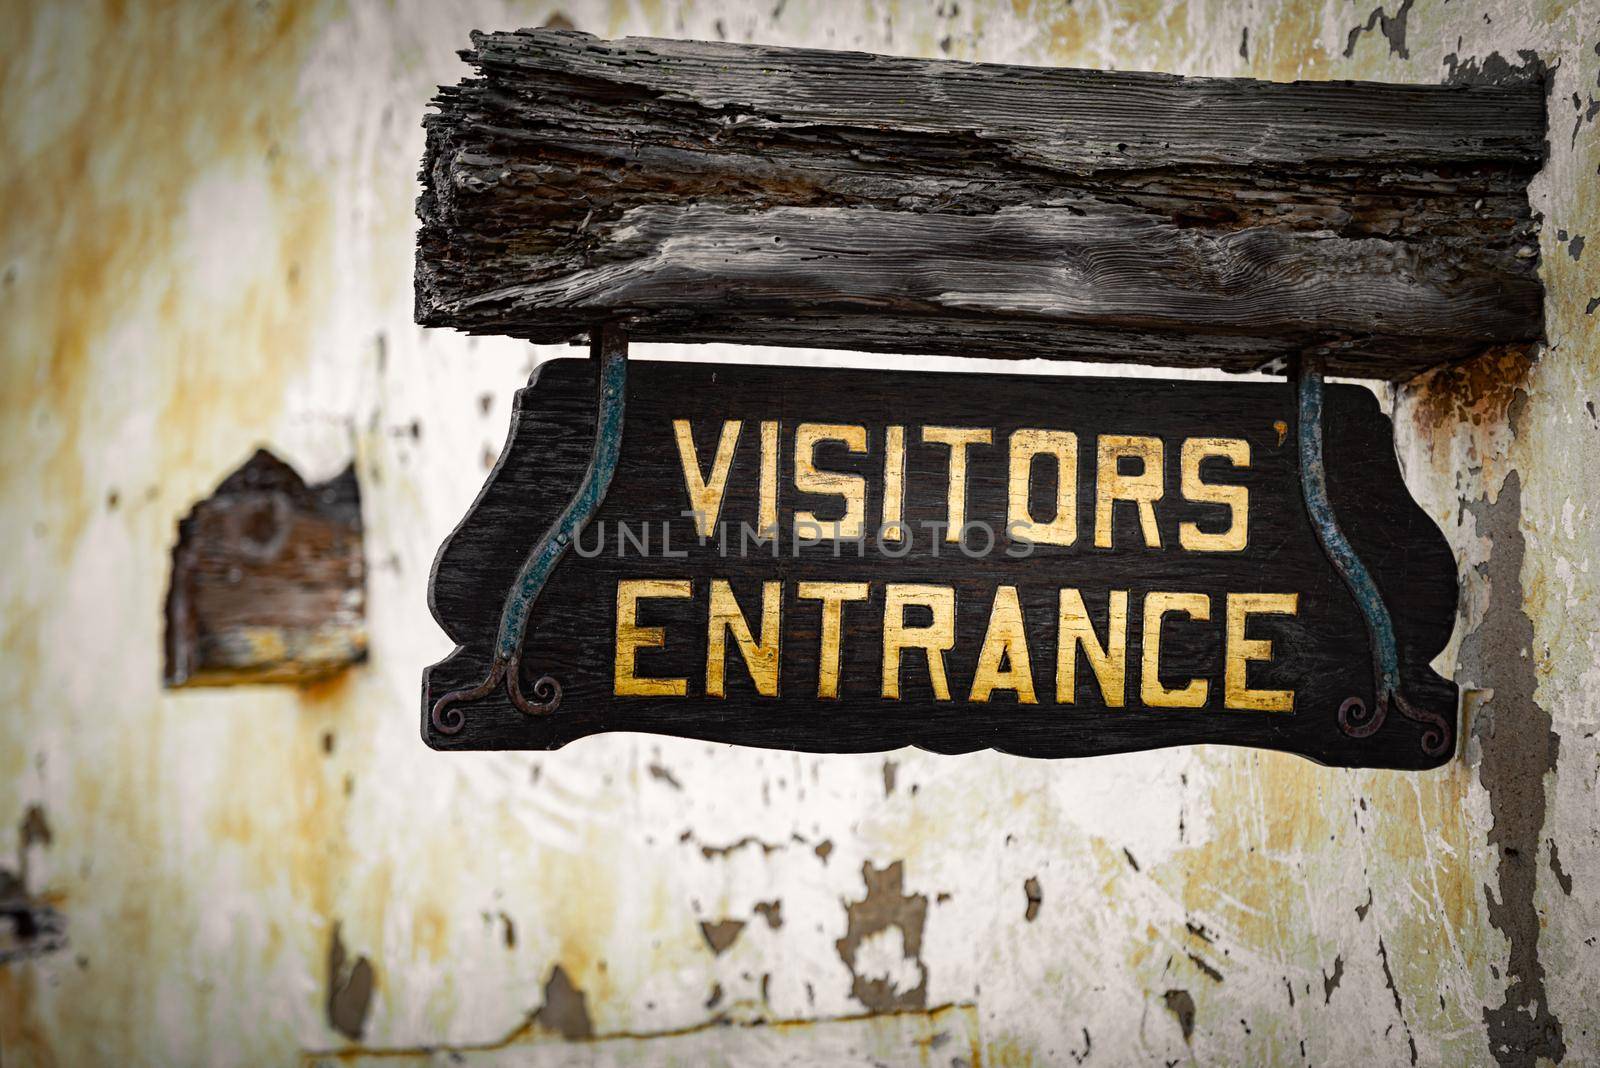 Old visitors entrance sign on wall, California, USA